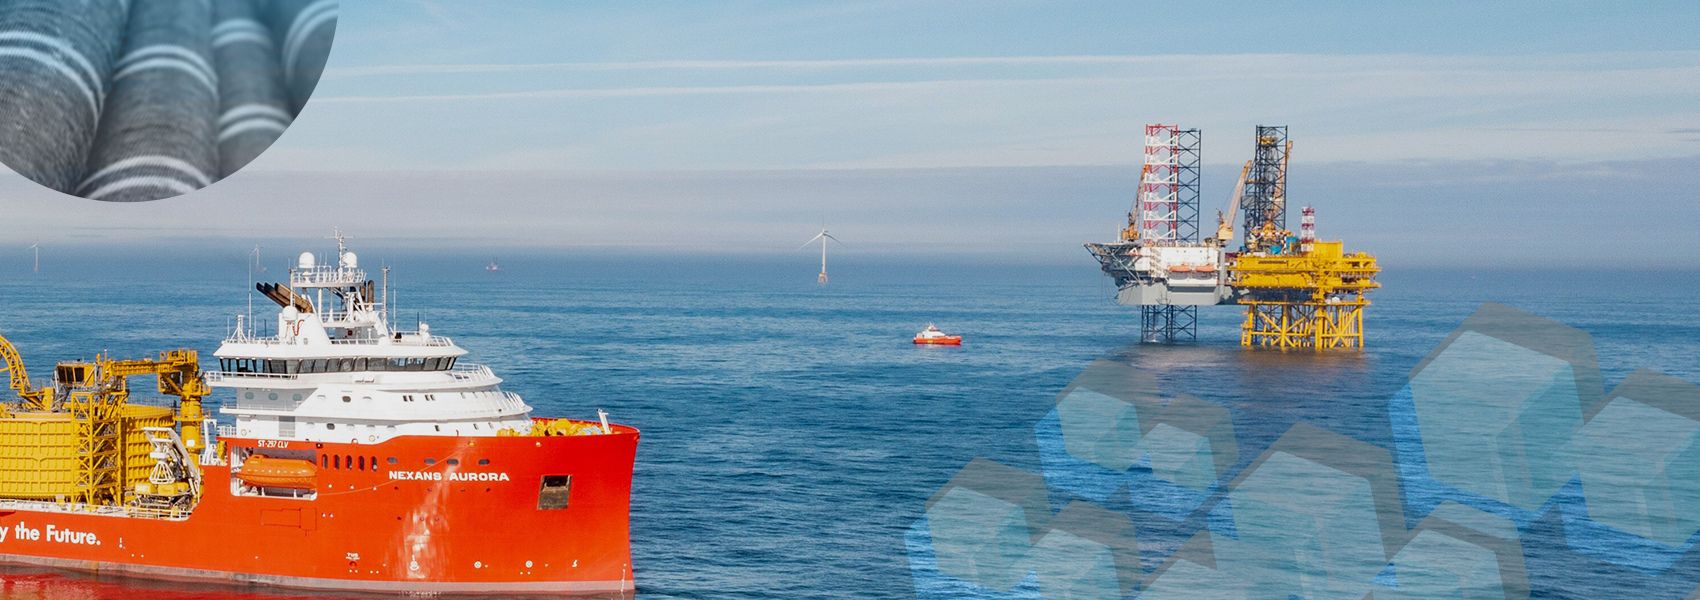 Nexans Aurora and offshore wind converters